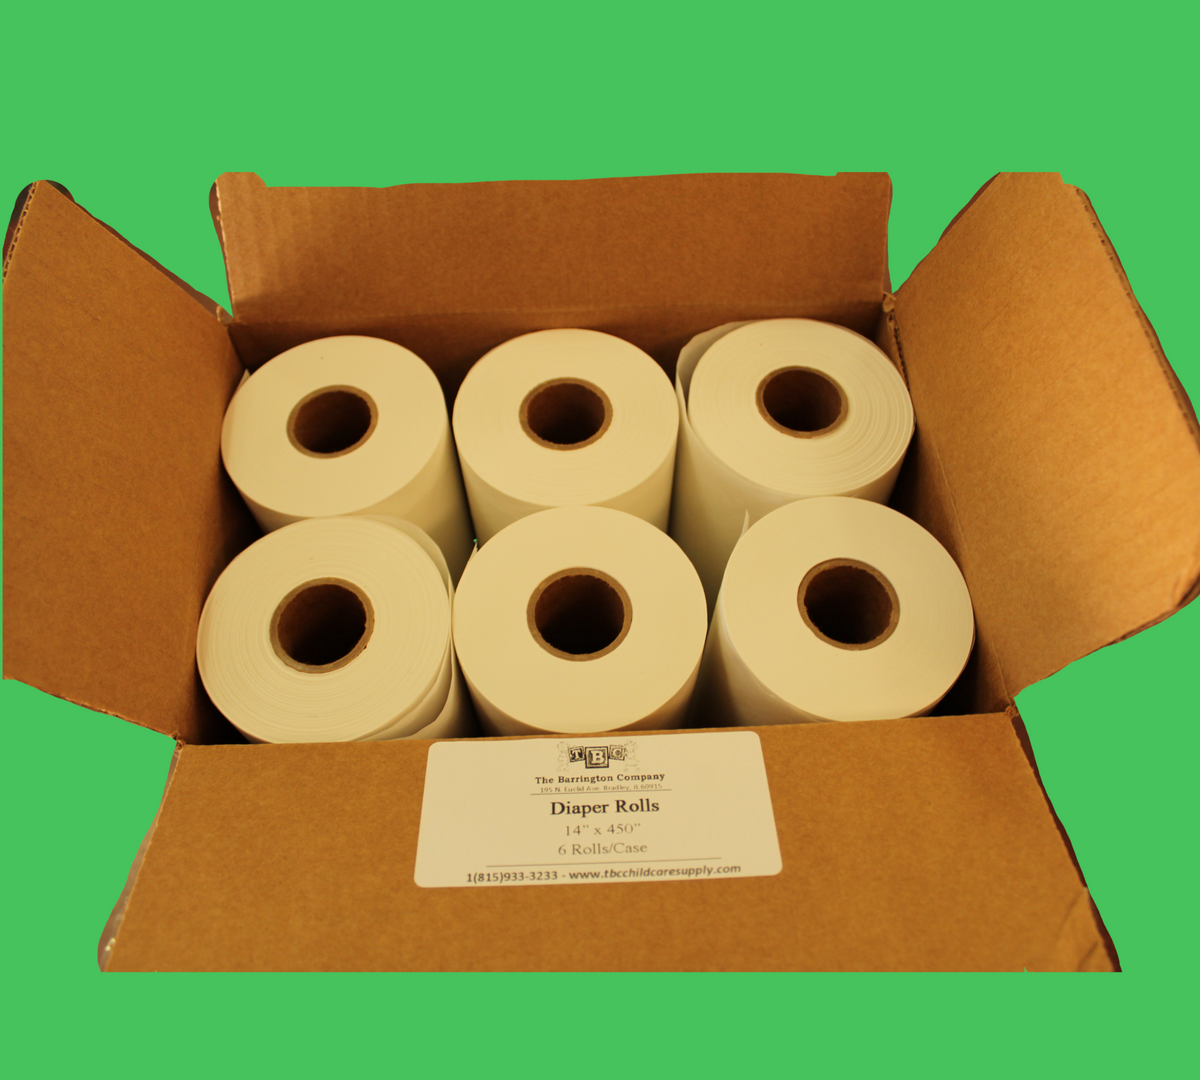 Disposable Changing Table Paper Rolls - 14